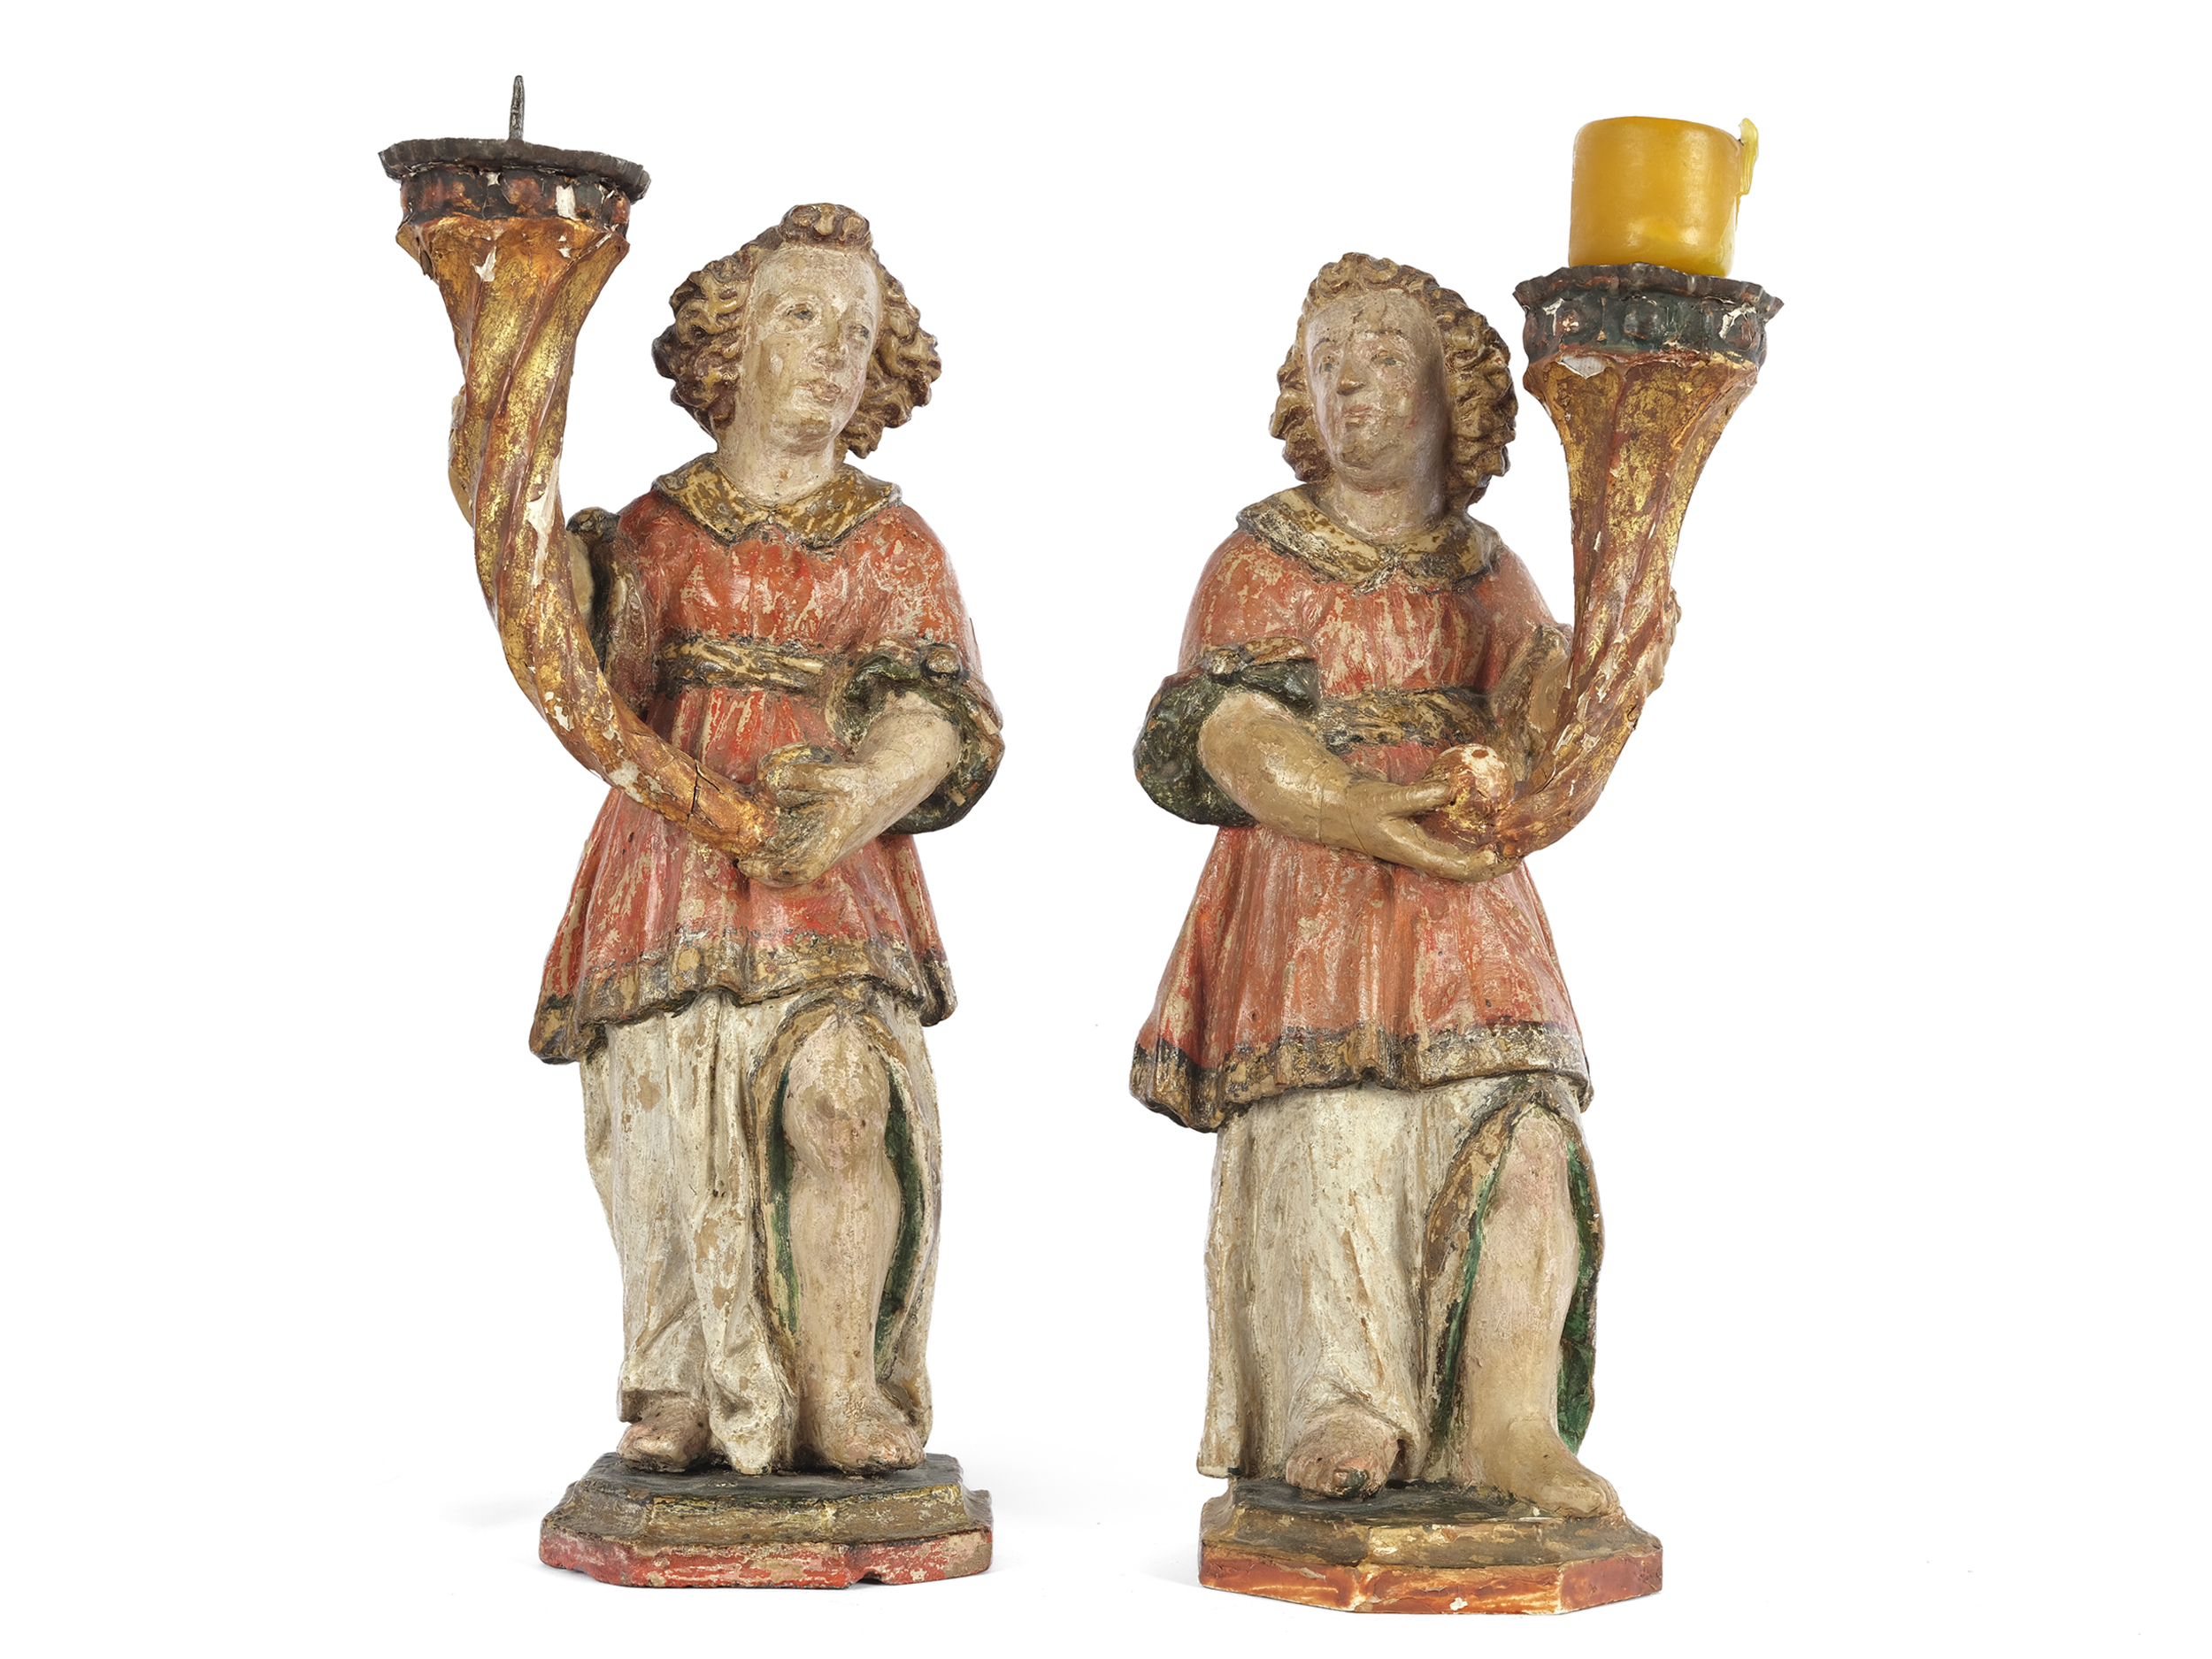 Zürn family, circle of, pair of candlestick angels